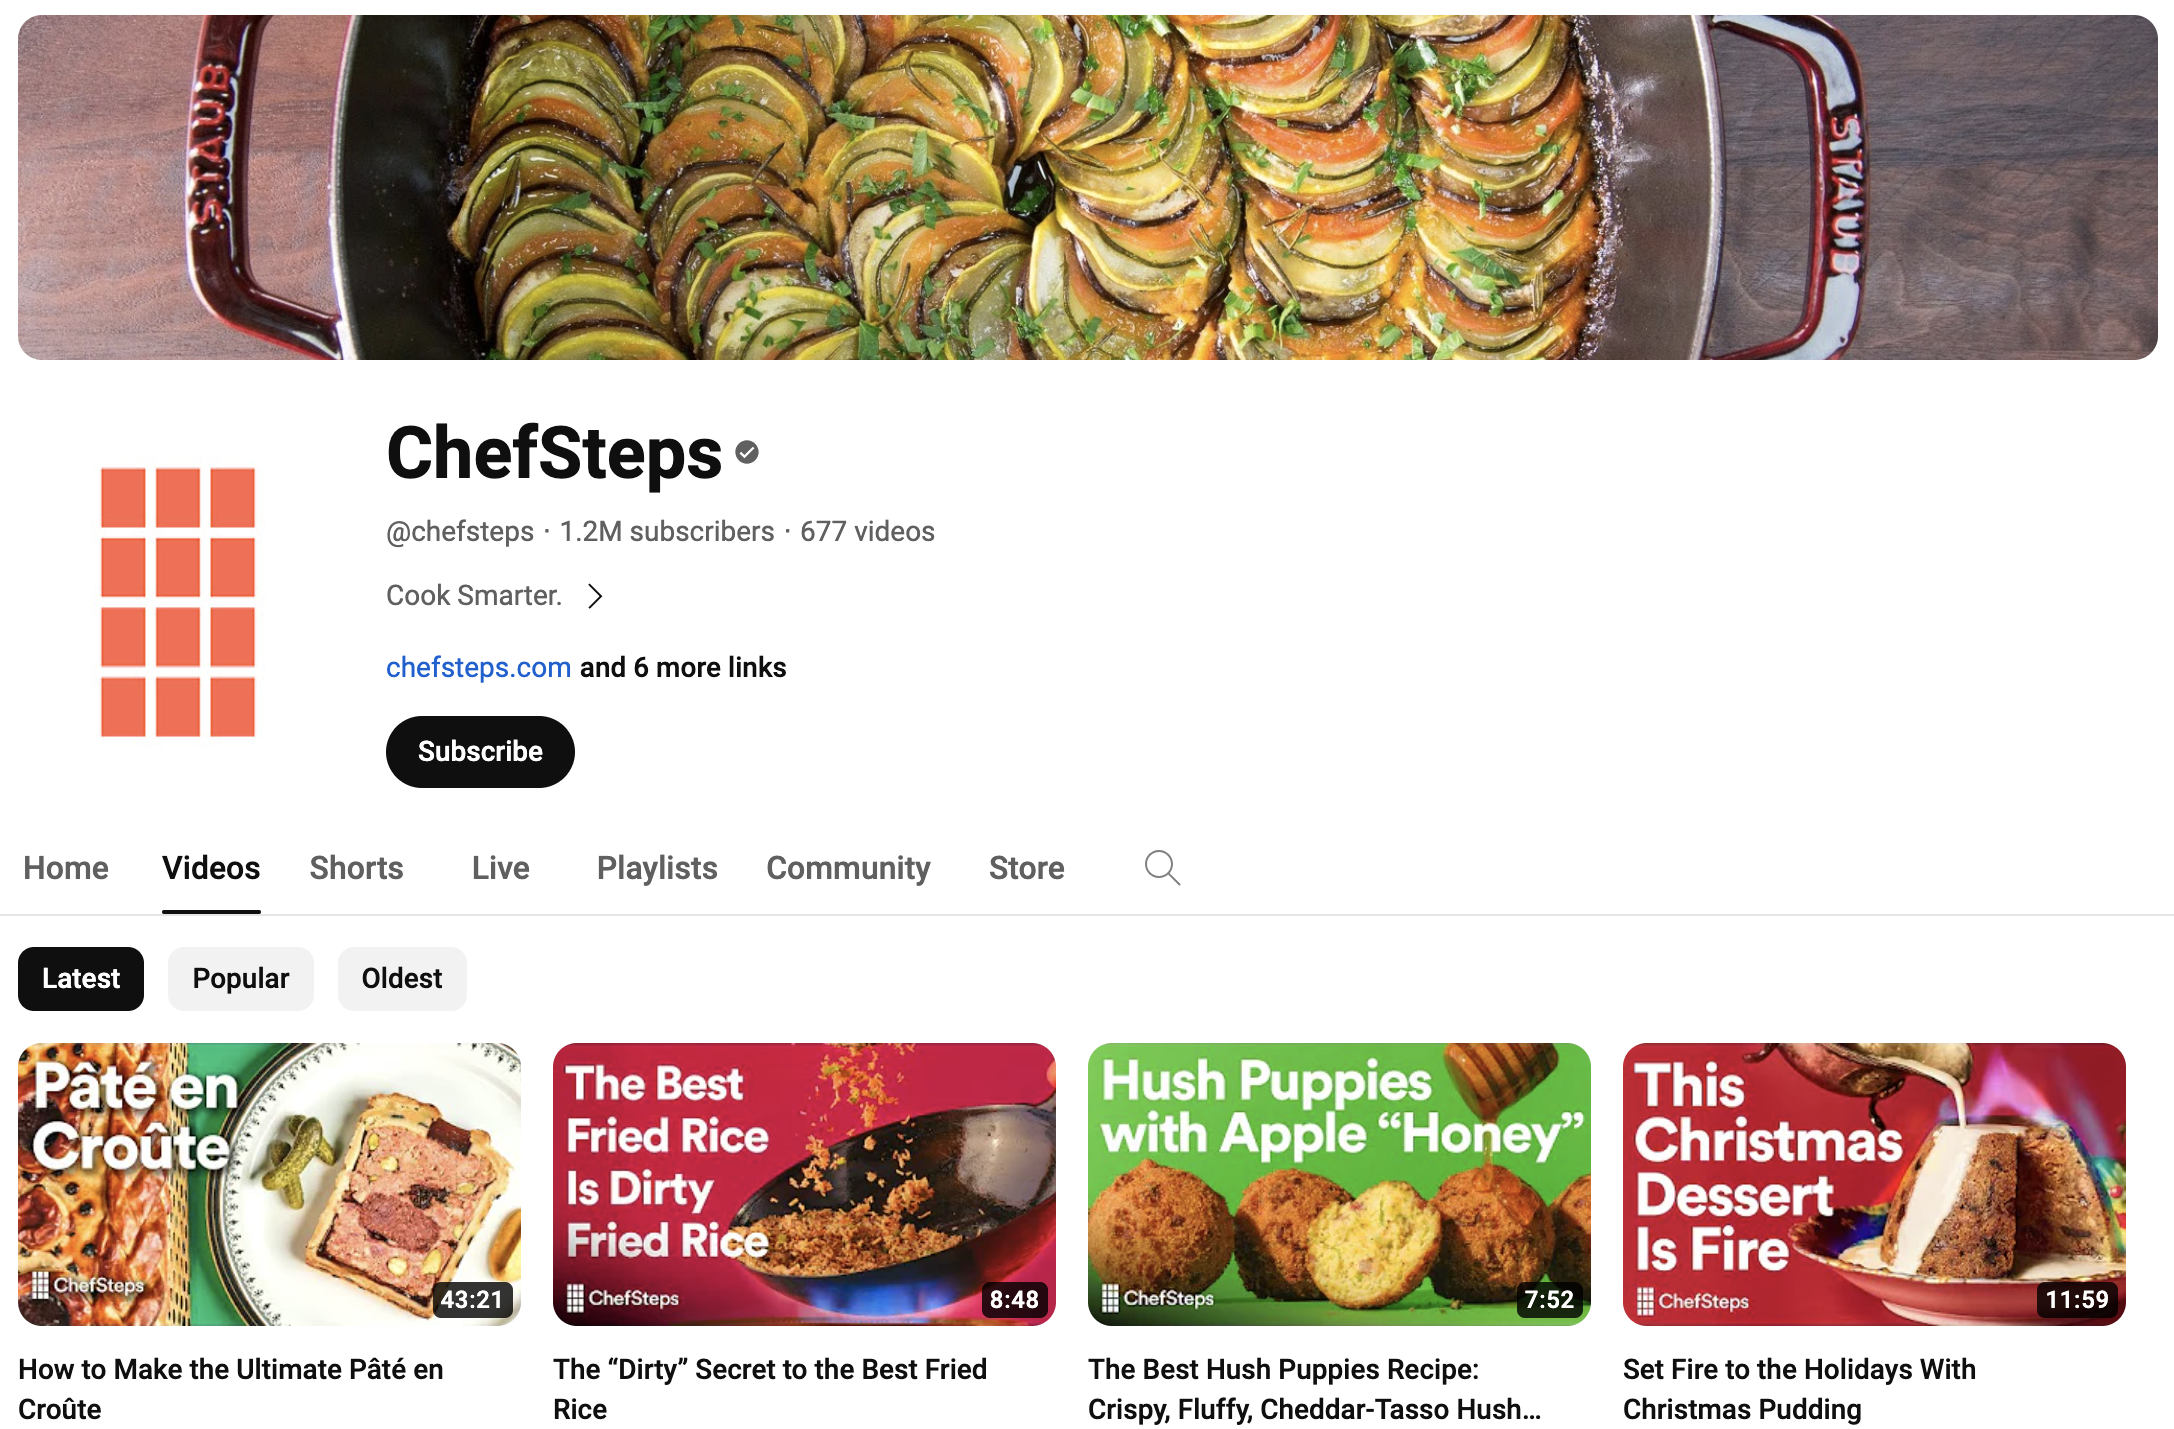 Screenshot of video page for YouTube cooking channel ChefSteps